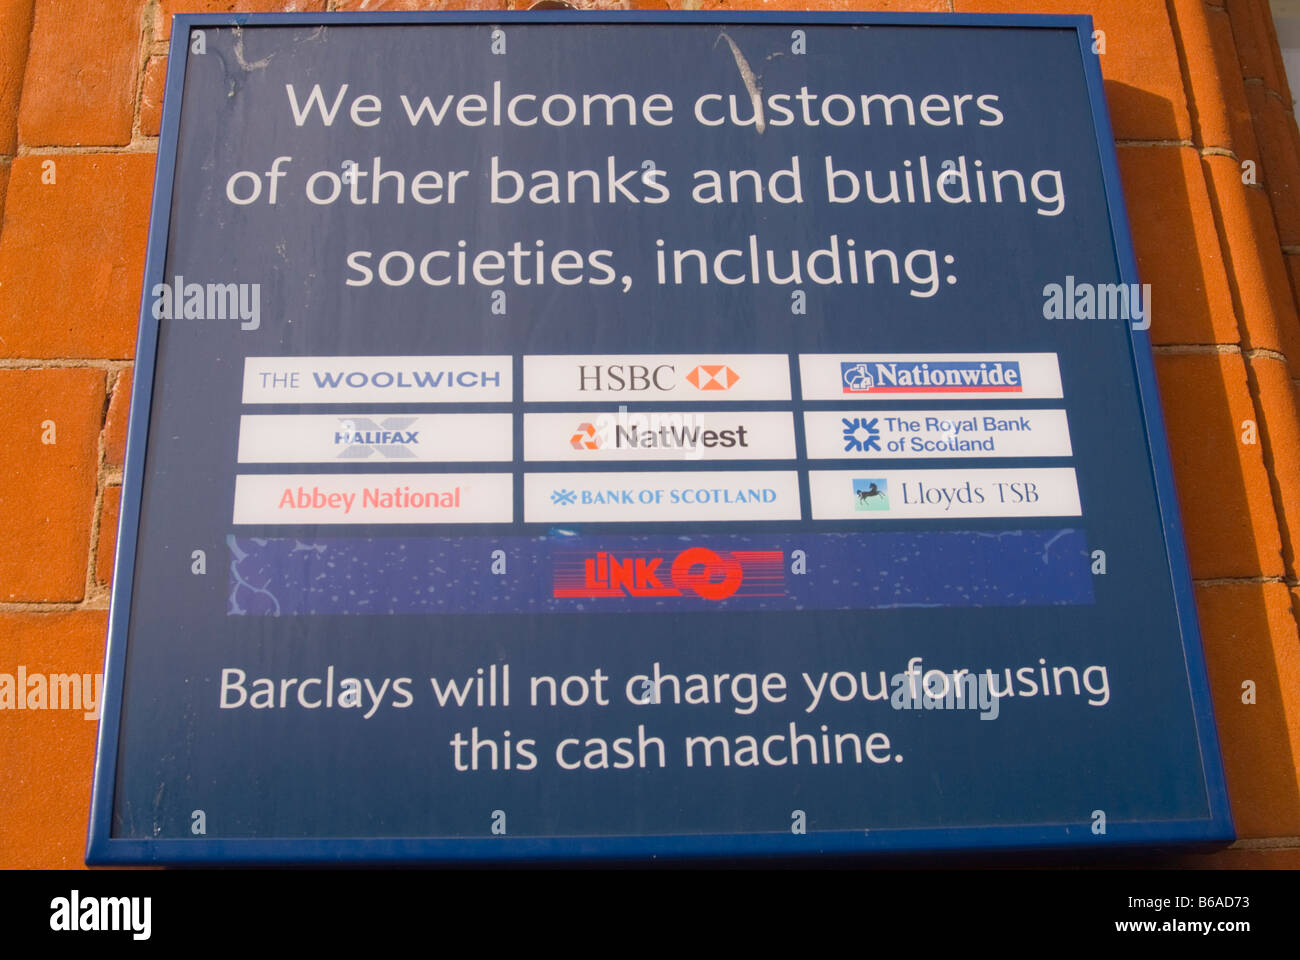 Sign outside Barclays Bank inviting customers of other banks to use their atm cash machine speedbank without charge in uk Stock Photo